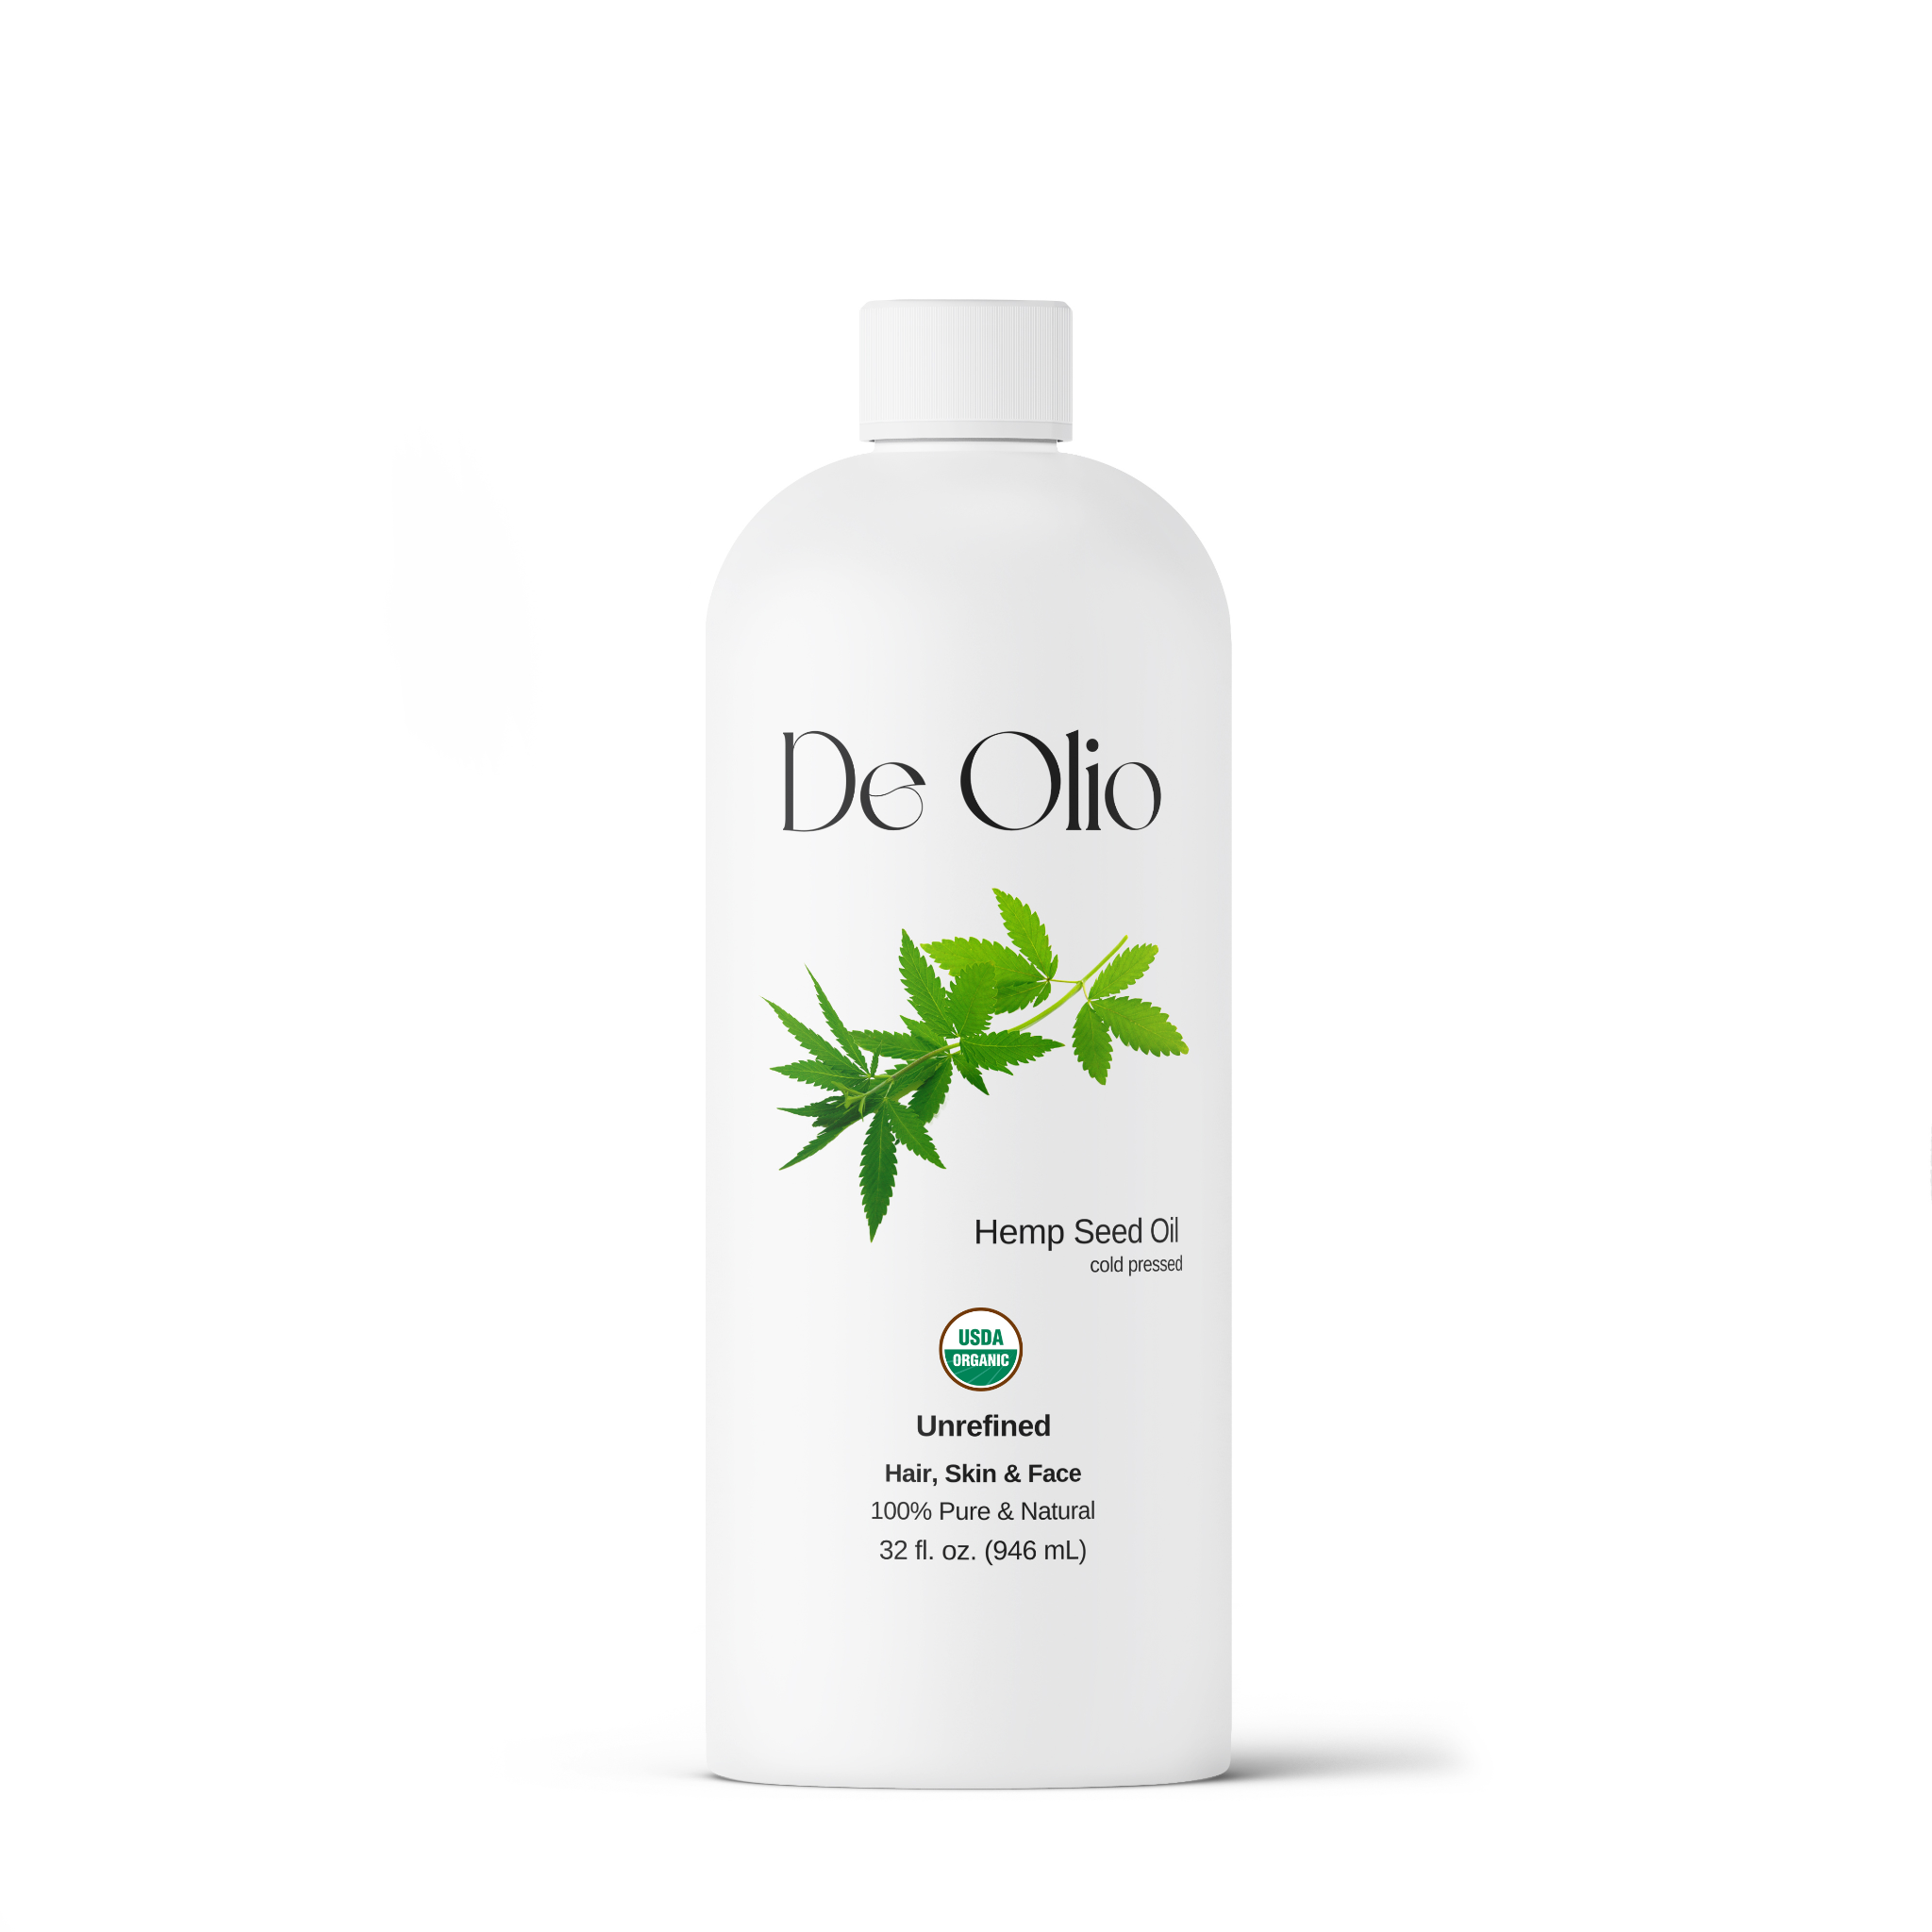 De Olio | Hemp Seed Oil | Organic | Pure & Natural | Carrier Oil | Skin, Face & Hair | Soap Making | Cold Pressed